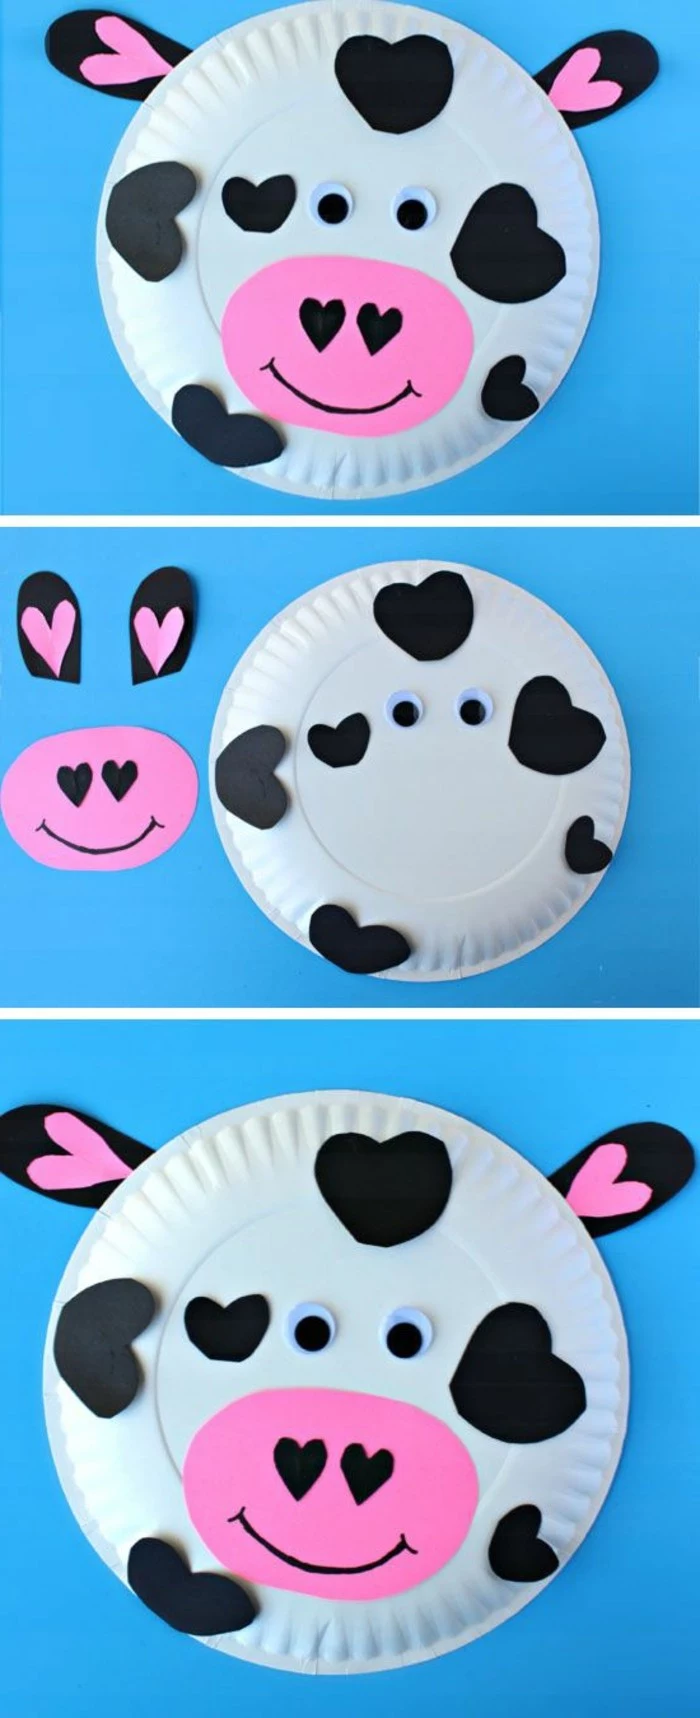 cow's face made from a white paper plate, decorated with pink and black paper cutouts, with stick-on eyes